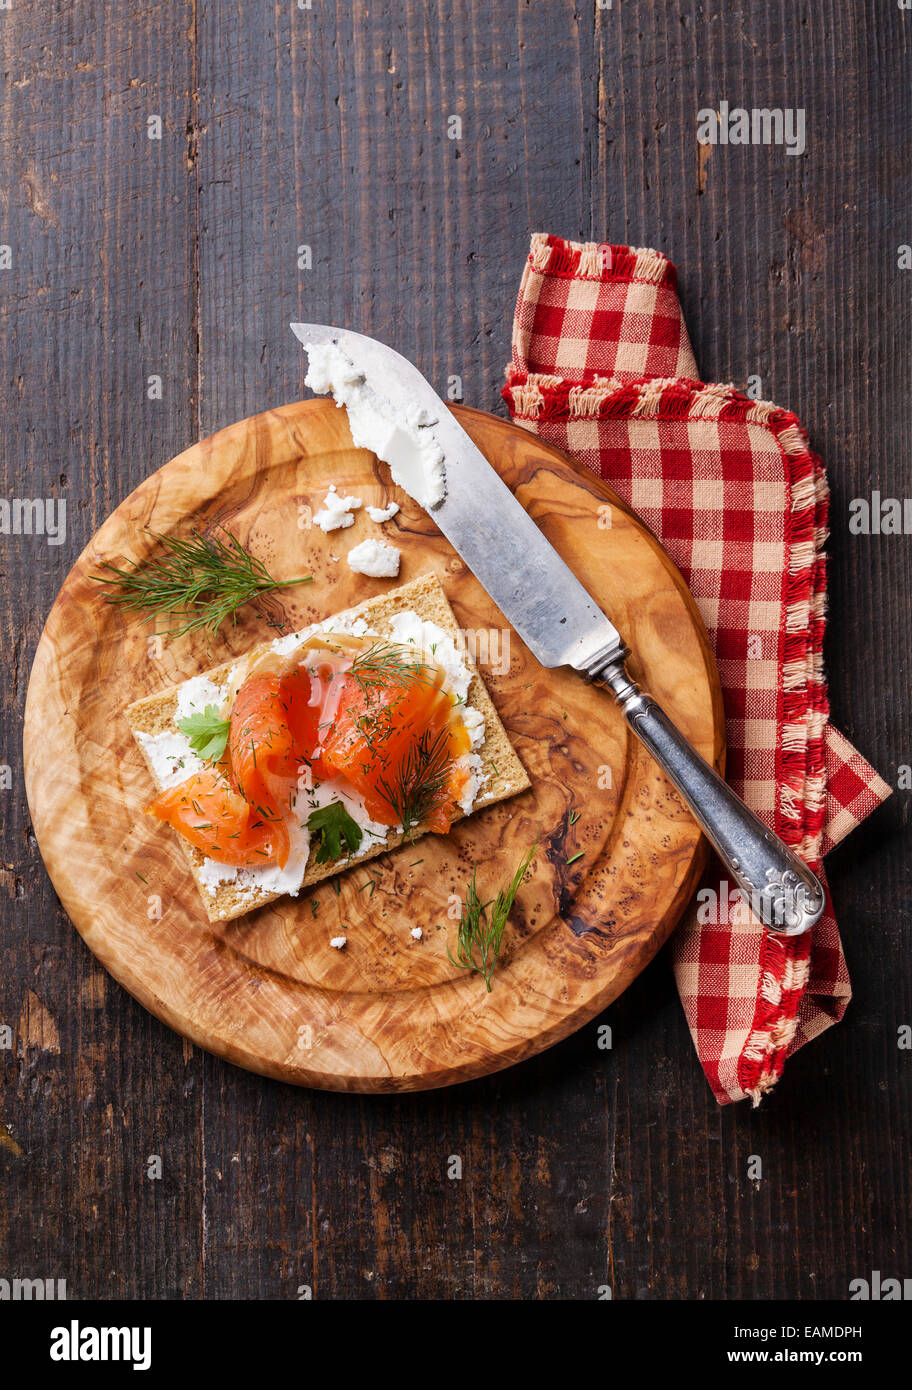 Sandwich on Crisp bread with Smoked salmon and soft Cream cheese on Olive wood plate Stock Photo